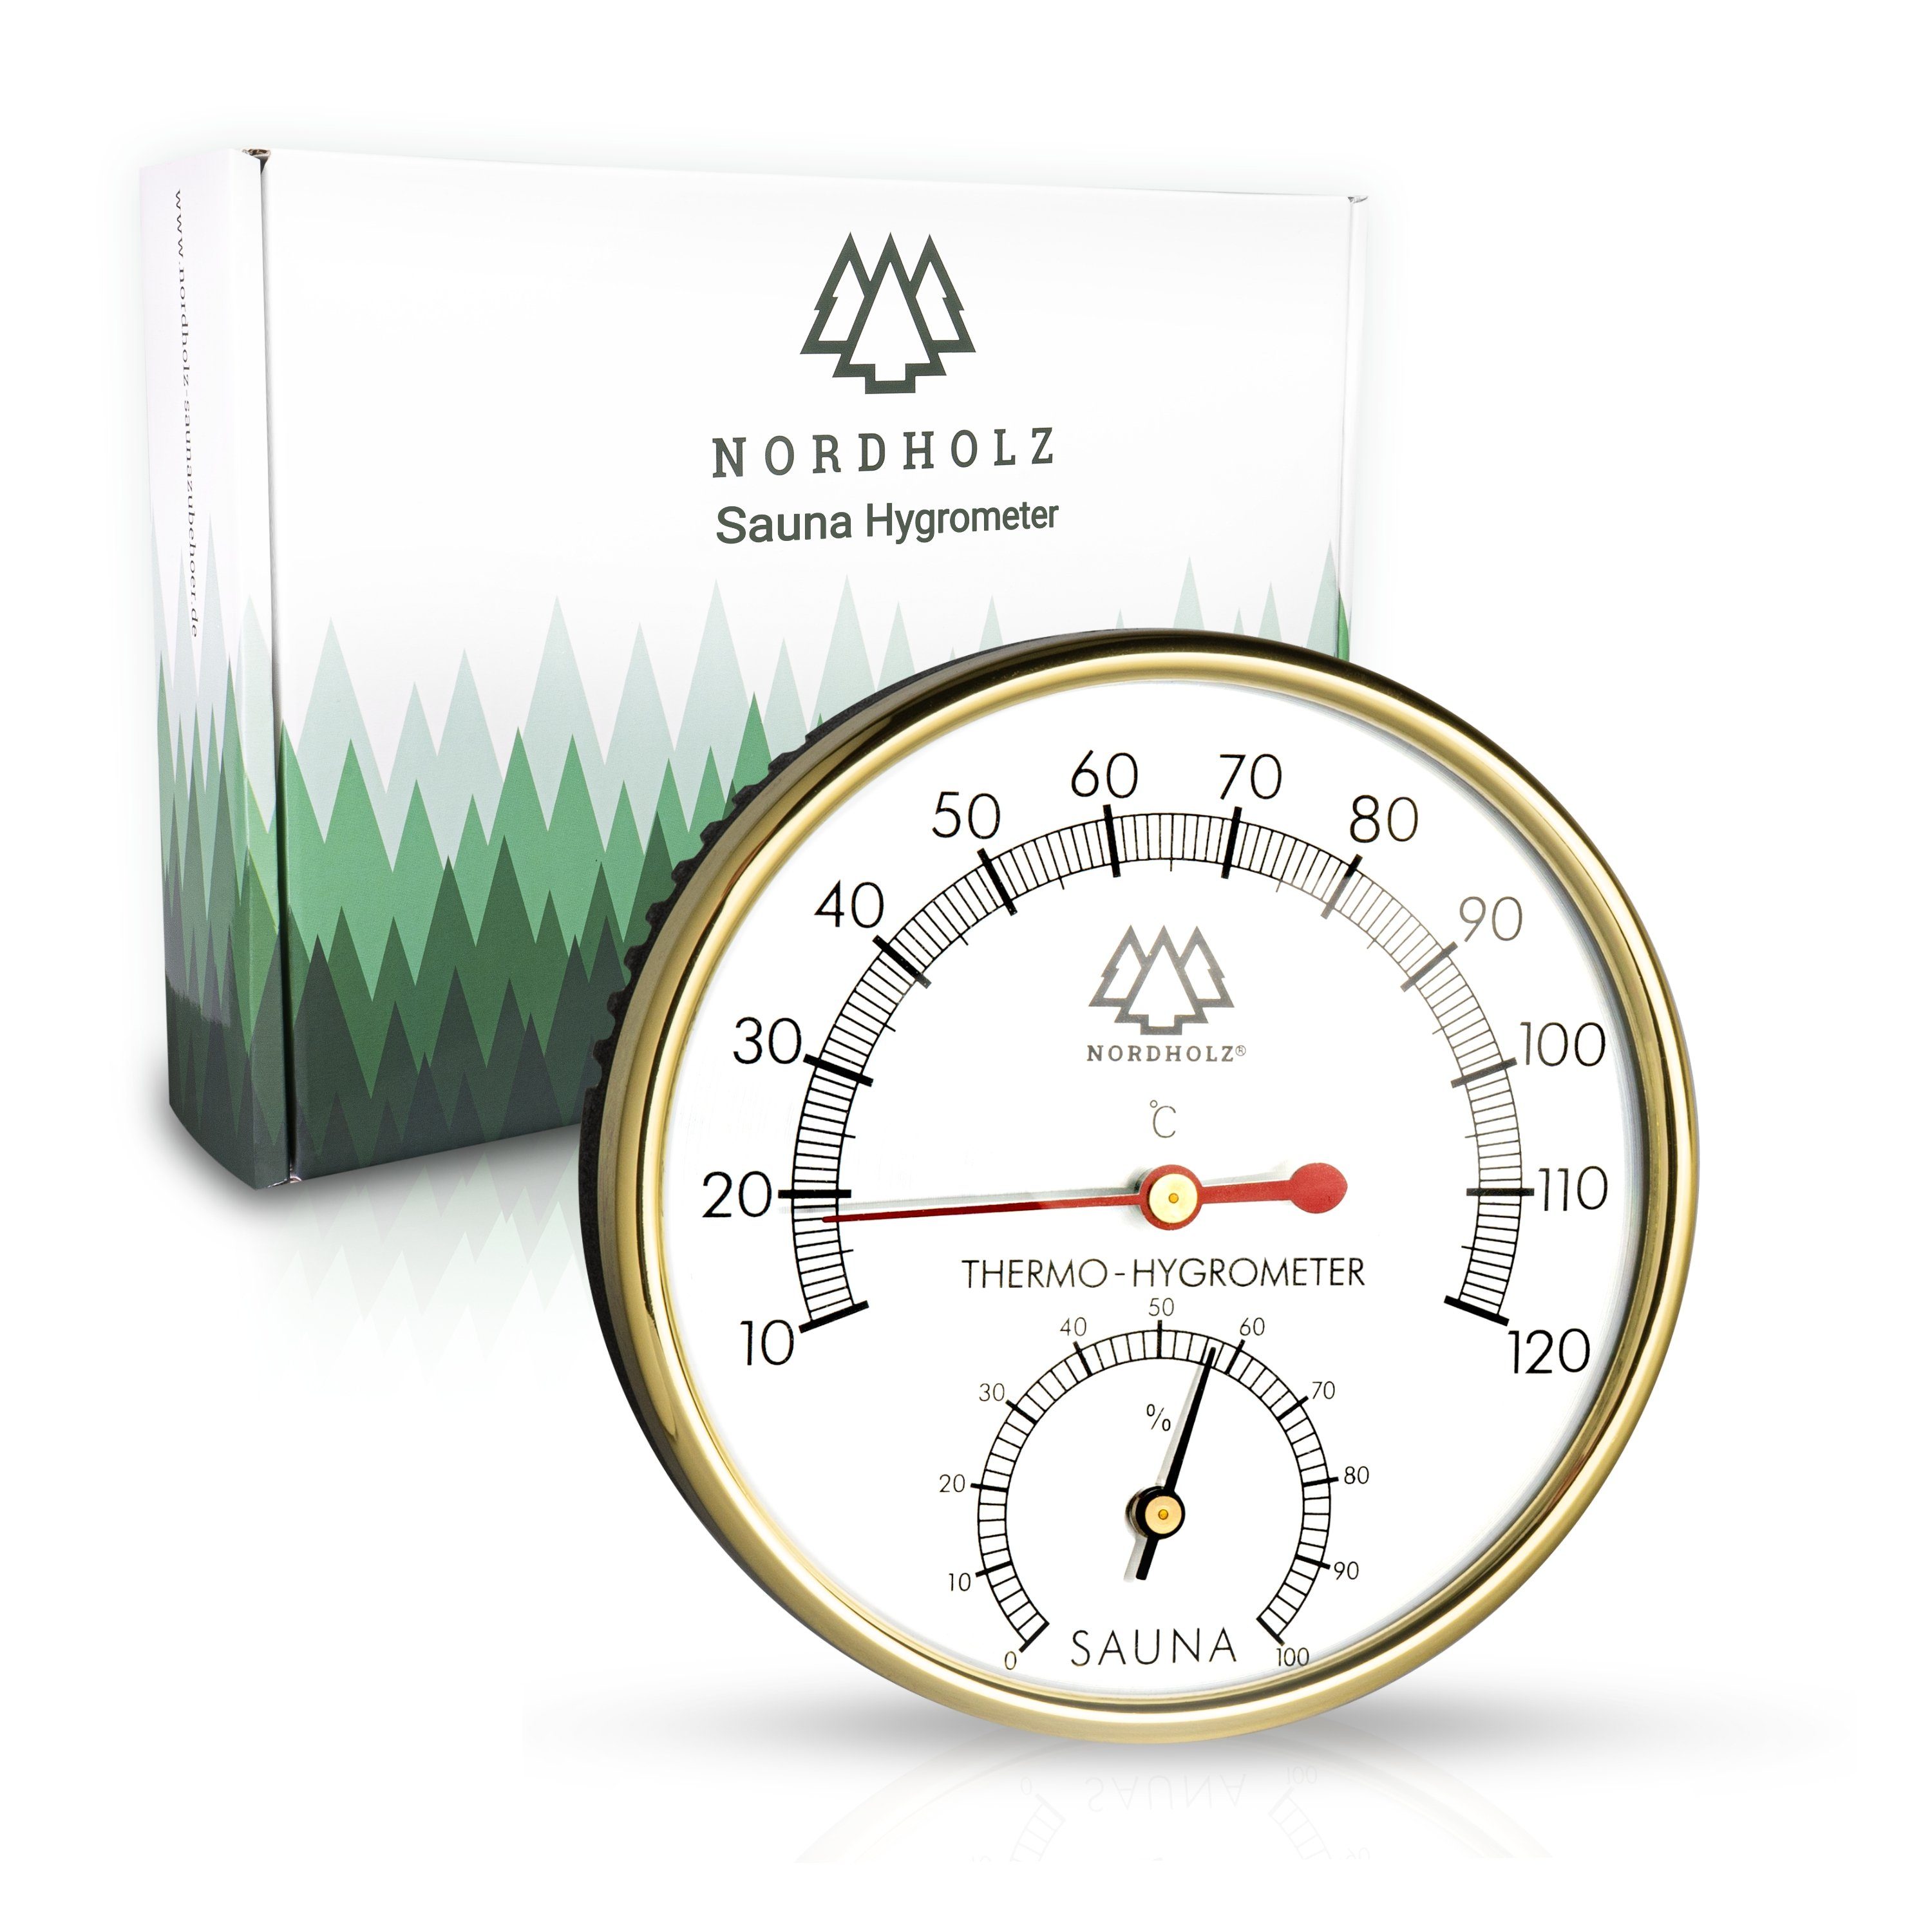 NORDHOLZ Raumthermometer Sauna Hygrometer Thermometer, 2in1 1-tlg